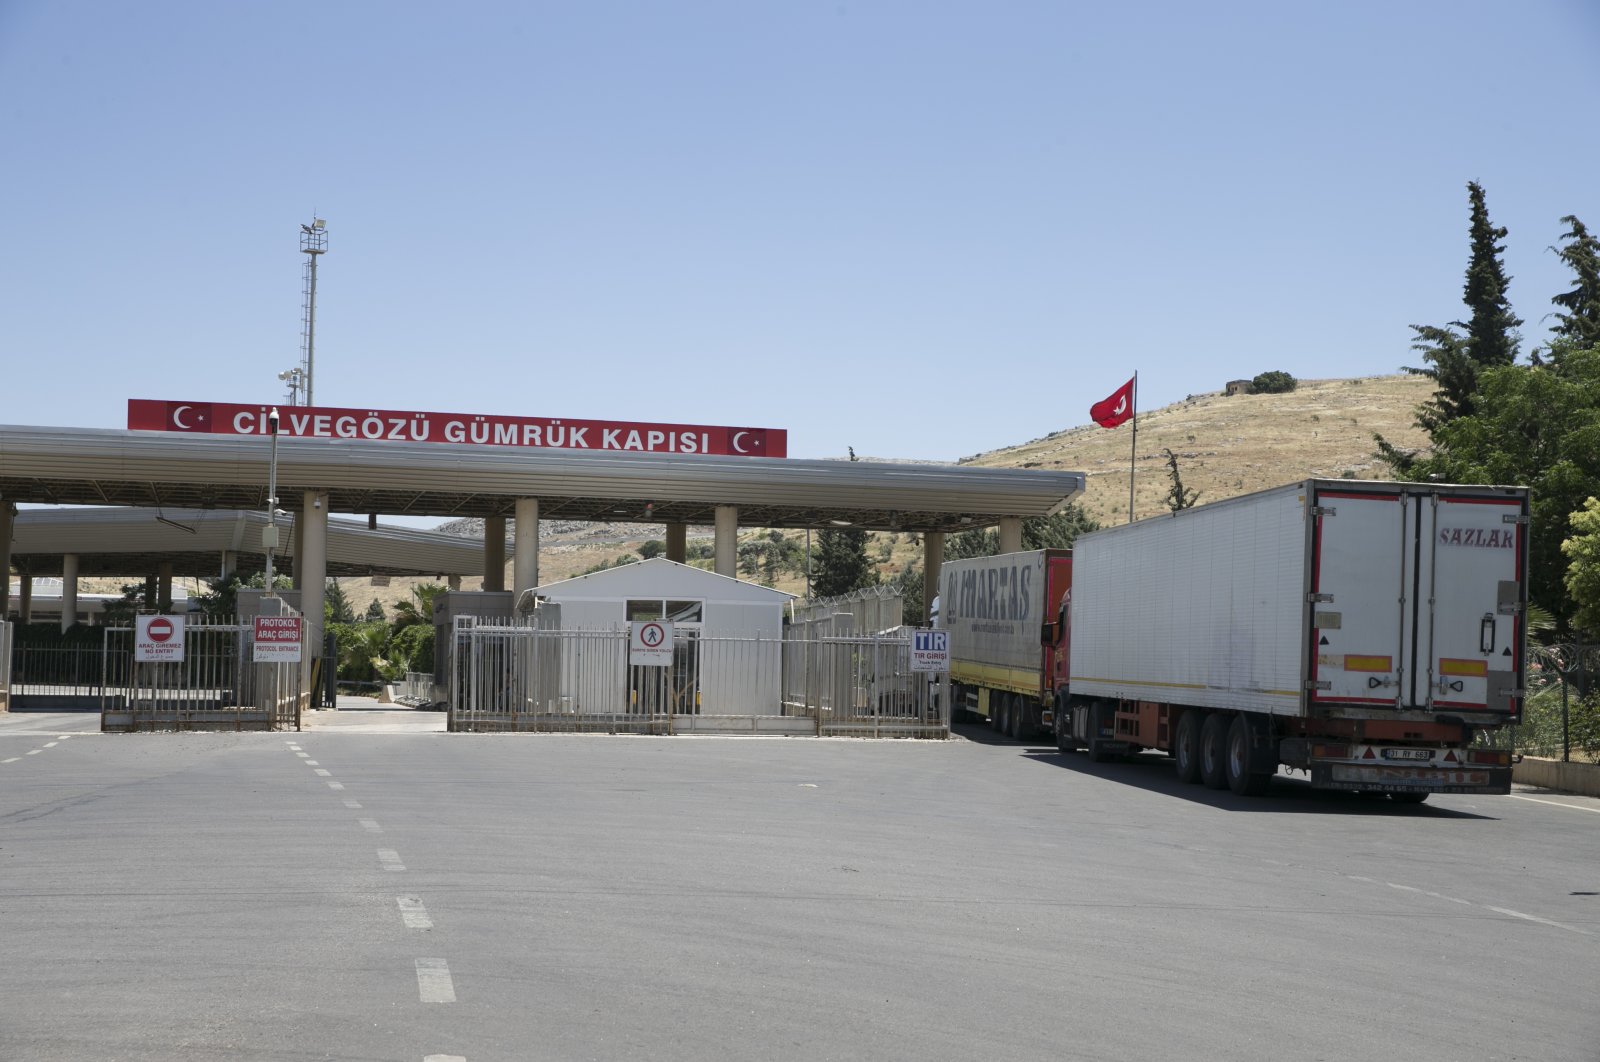 Trucks carrying humanitarian aid cross through the Cilvegözü Border Gate to deliver supplies to civilians in Syria's Idlib province, June 3, 2020. (AA Photo)